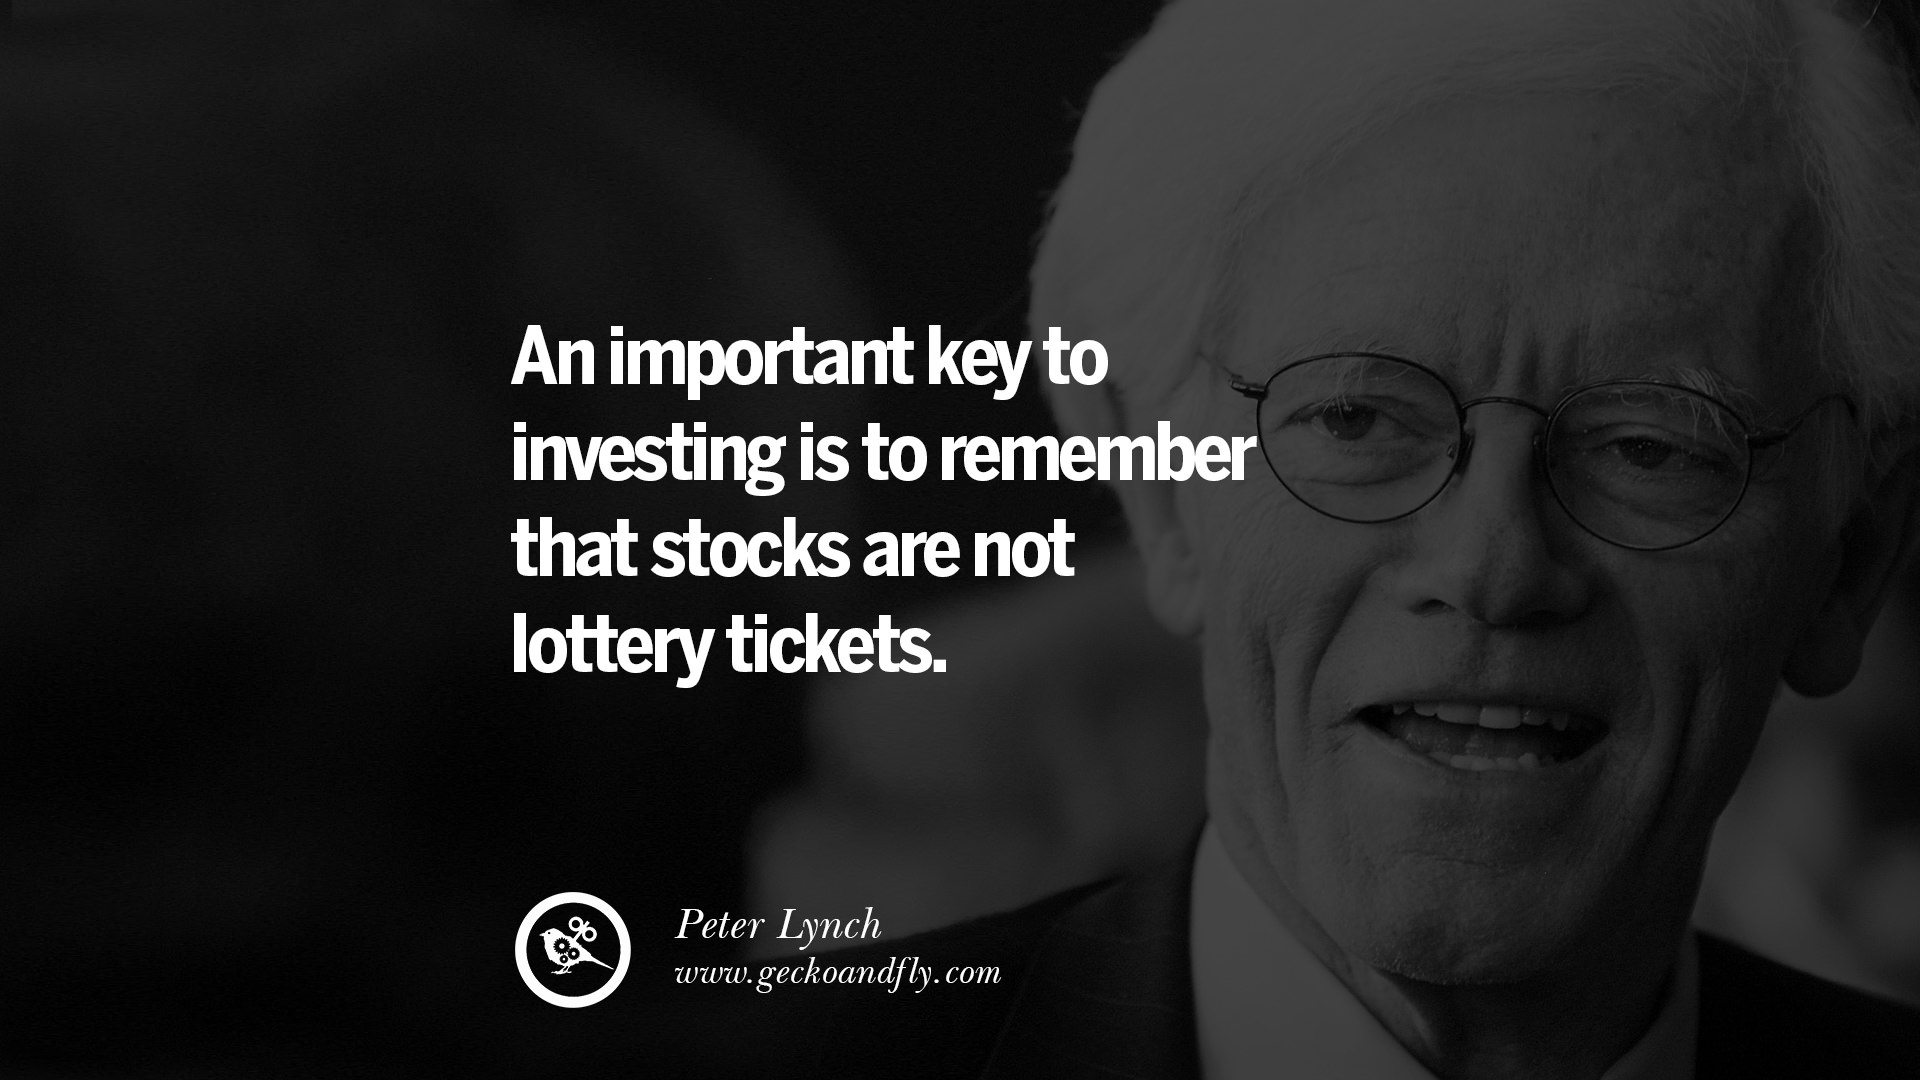 stock market quoted